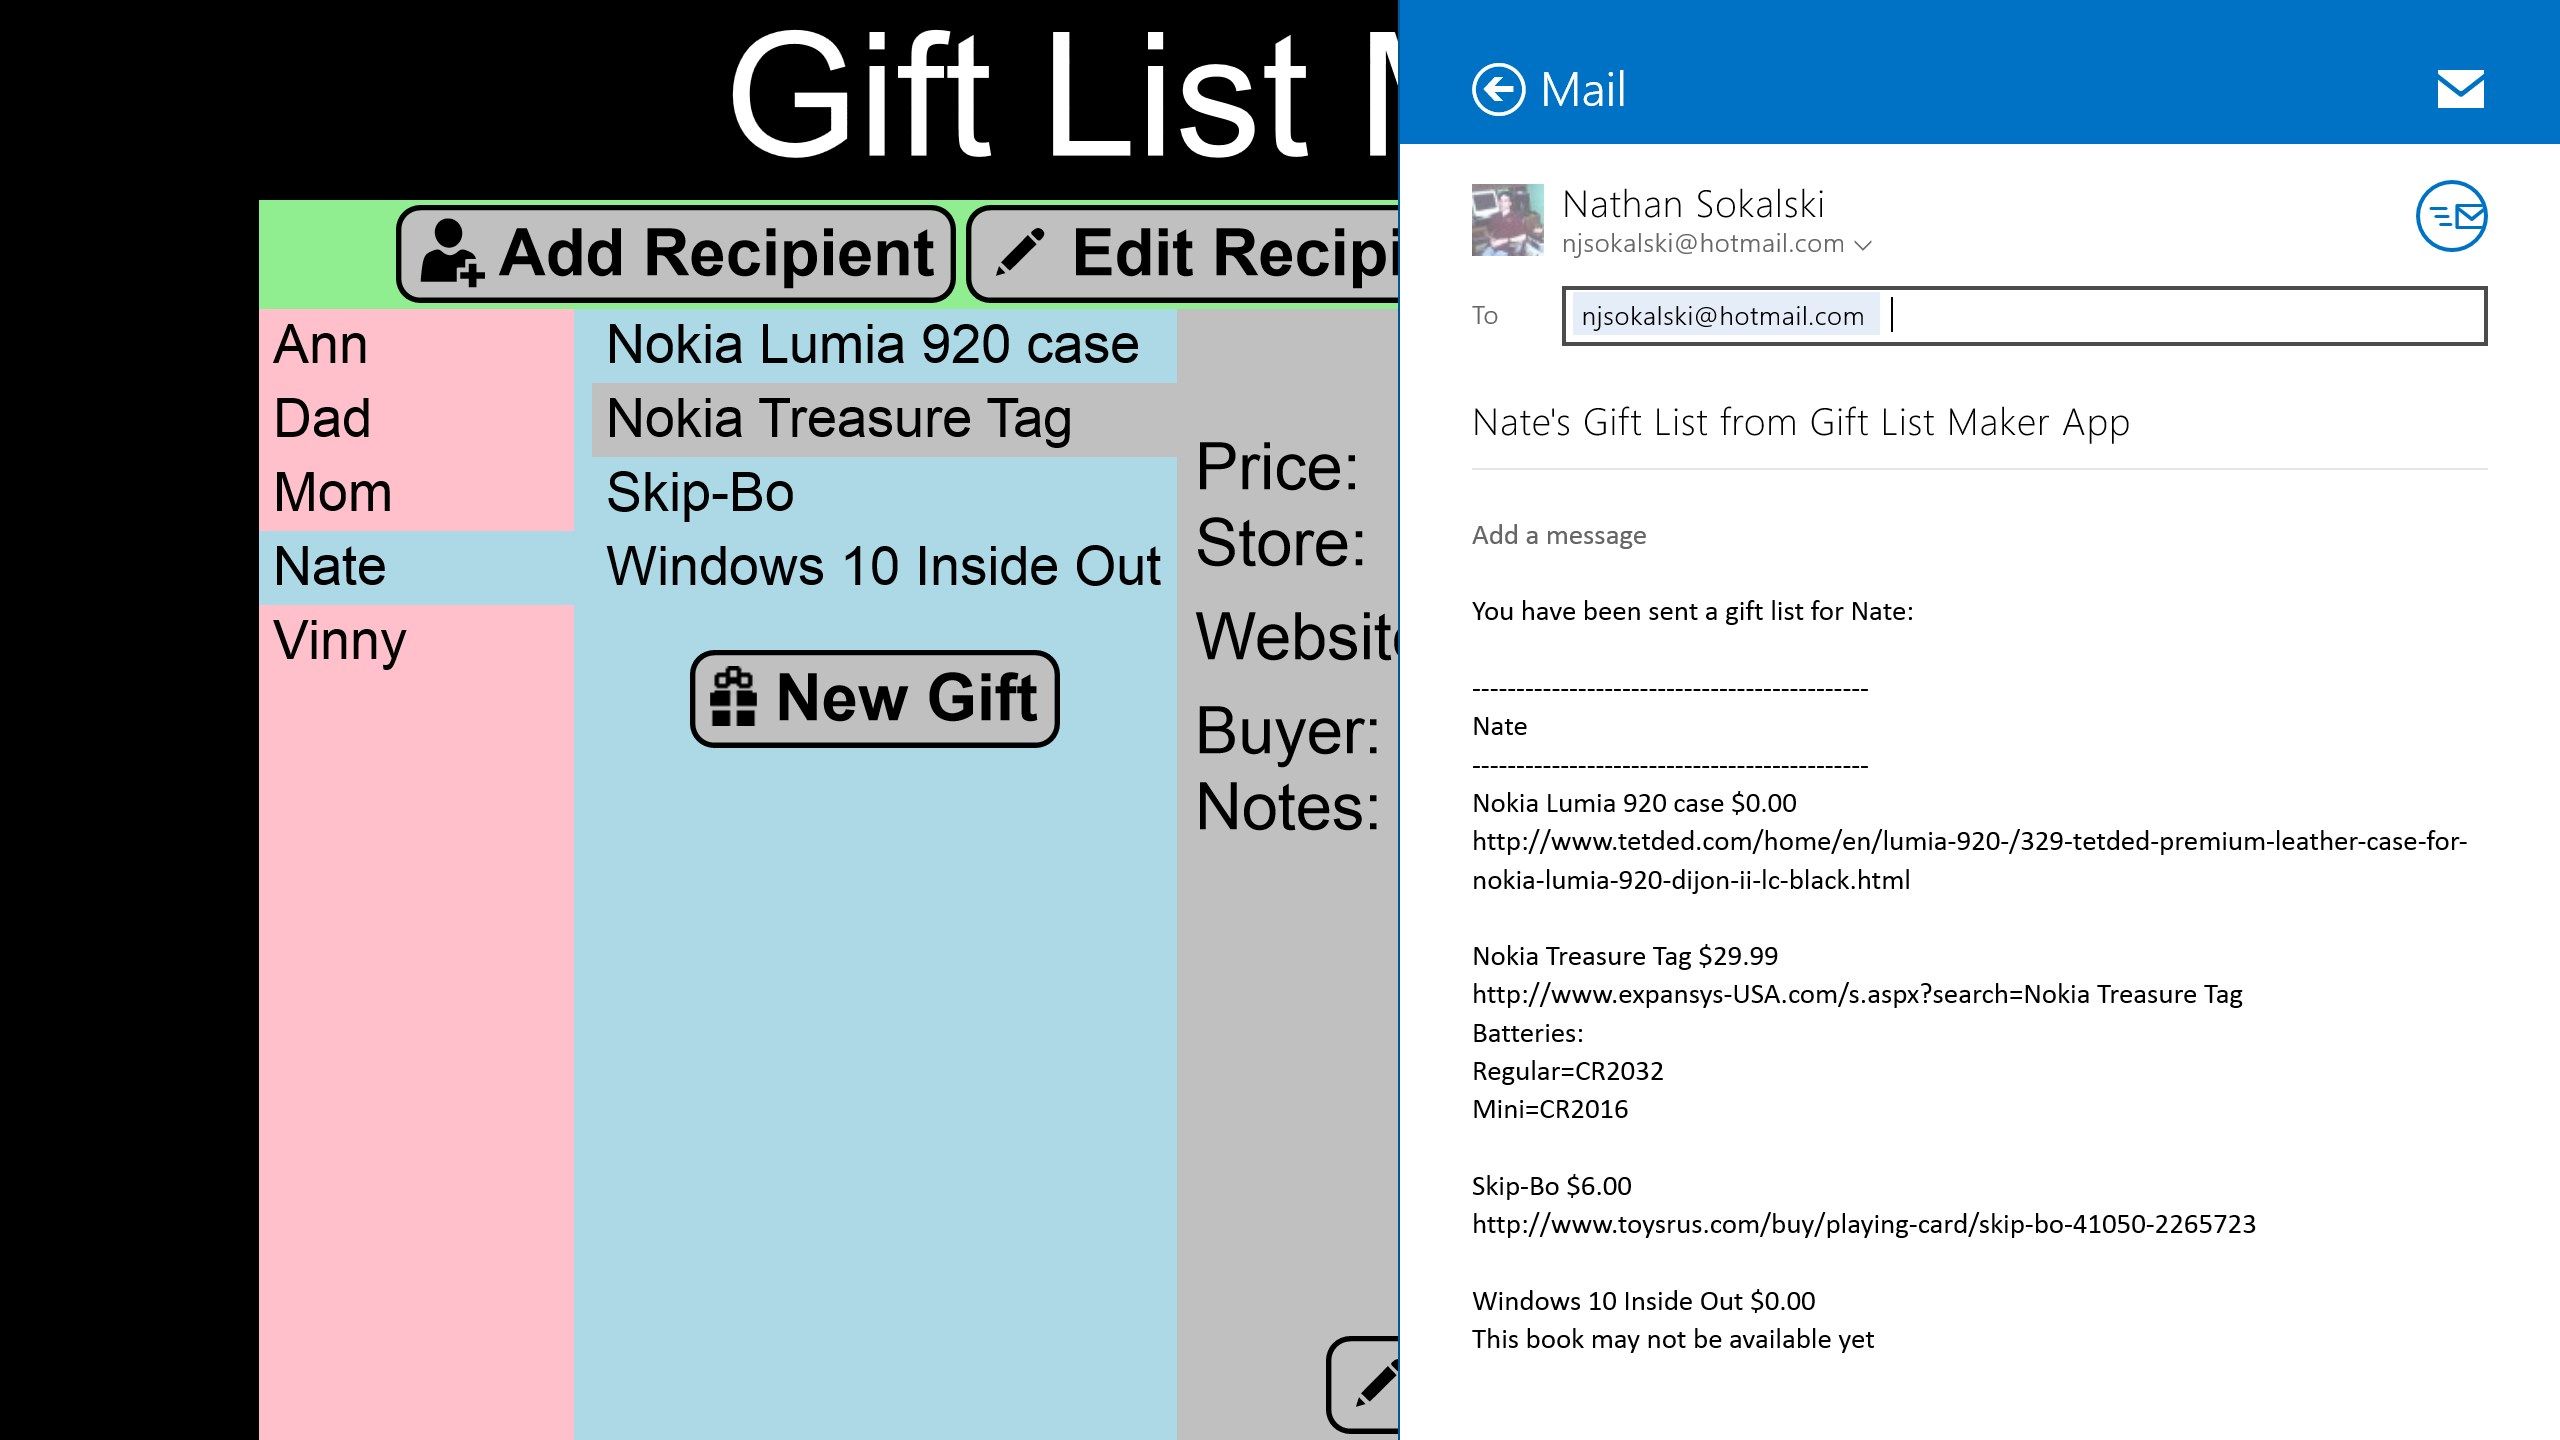 You can send the gift list for one or all of your recipients as an email